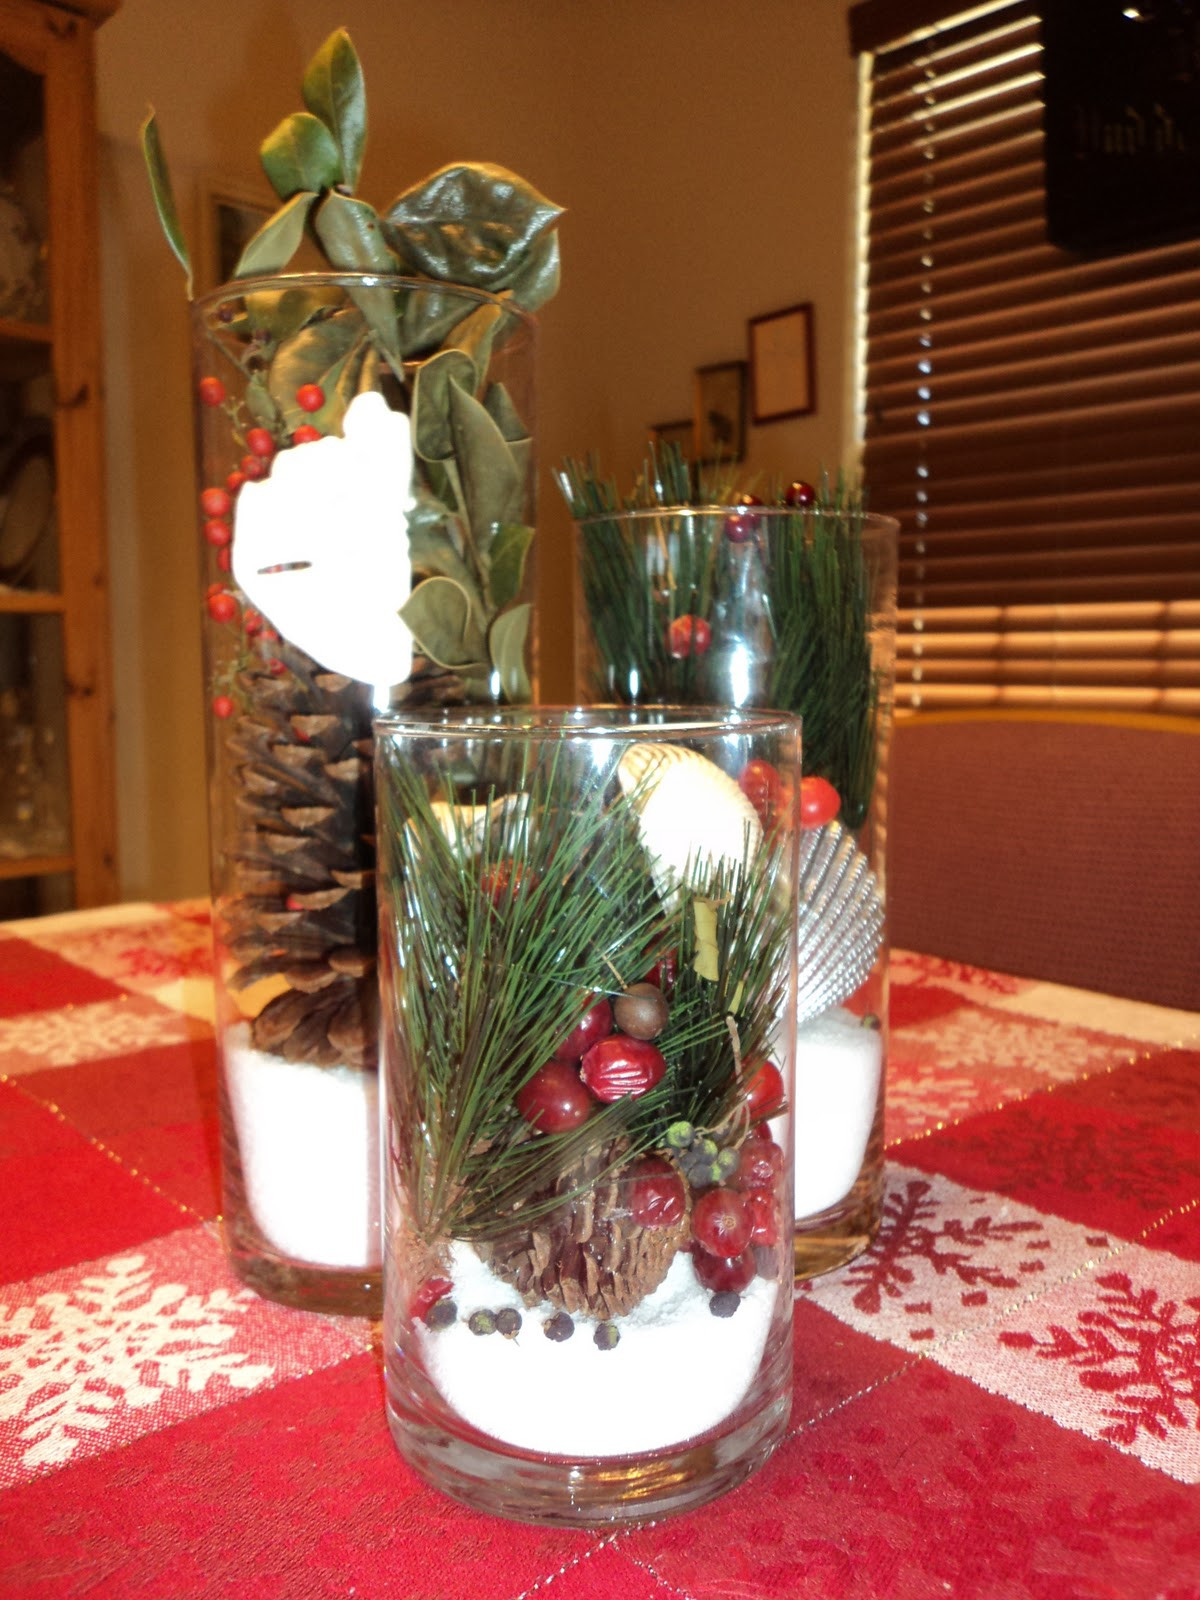 Simple Christmas Table Decorations
 BEAUTIFUL CHRISTMAS CENTERPIECES TO ENHANCE THE BEAUTY OF